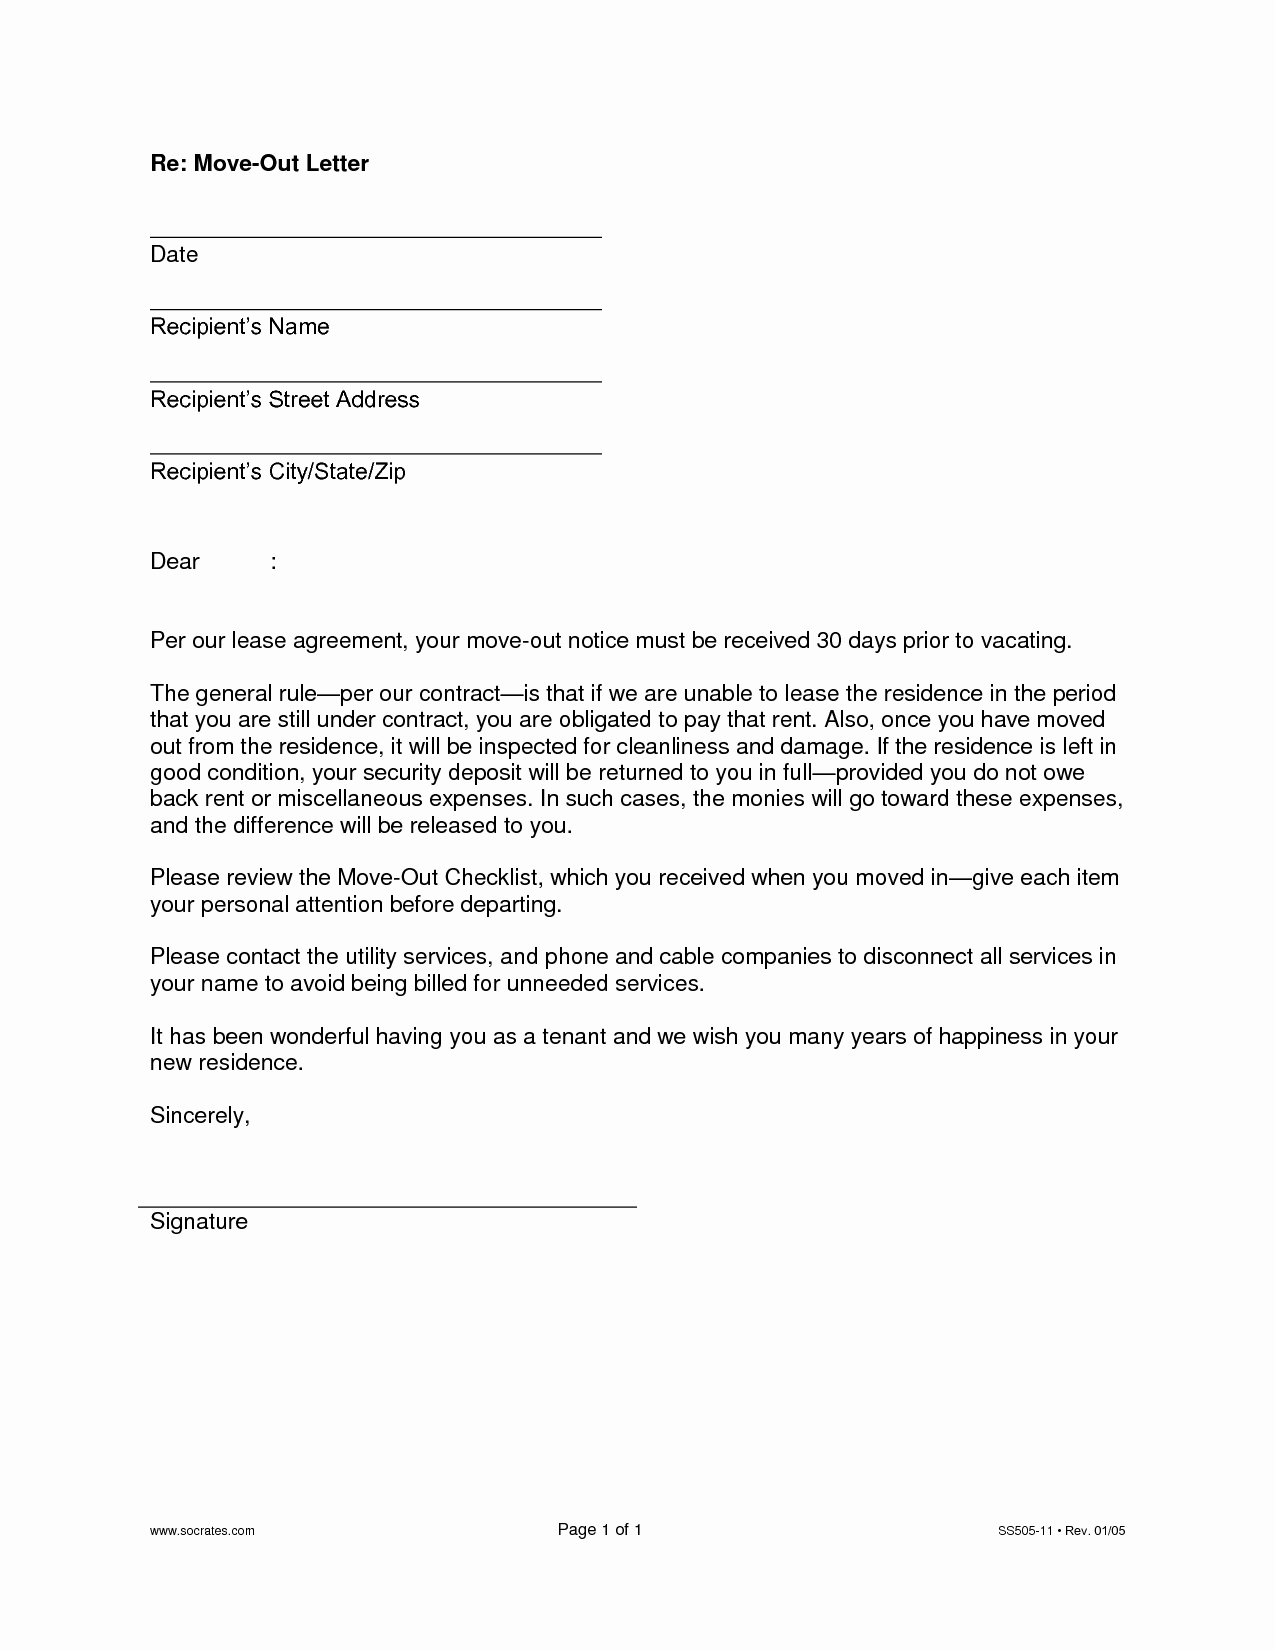 Sample Letter to Tenant Beautiful Best S Of Letter to Landlord Moving Out Letter From